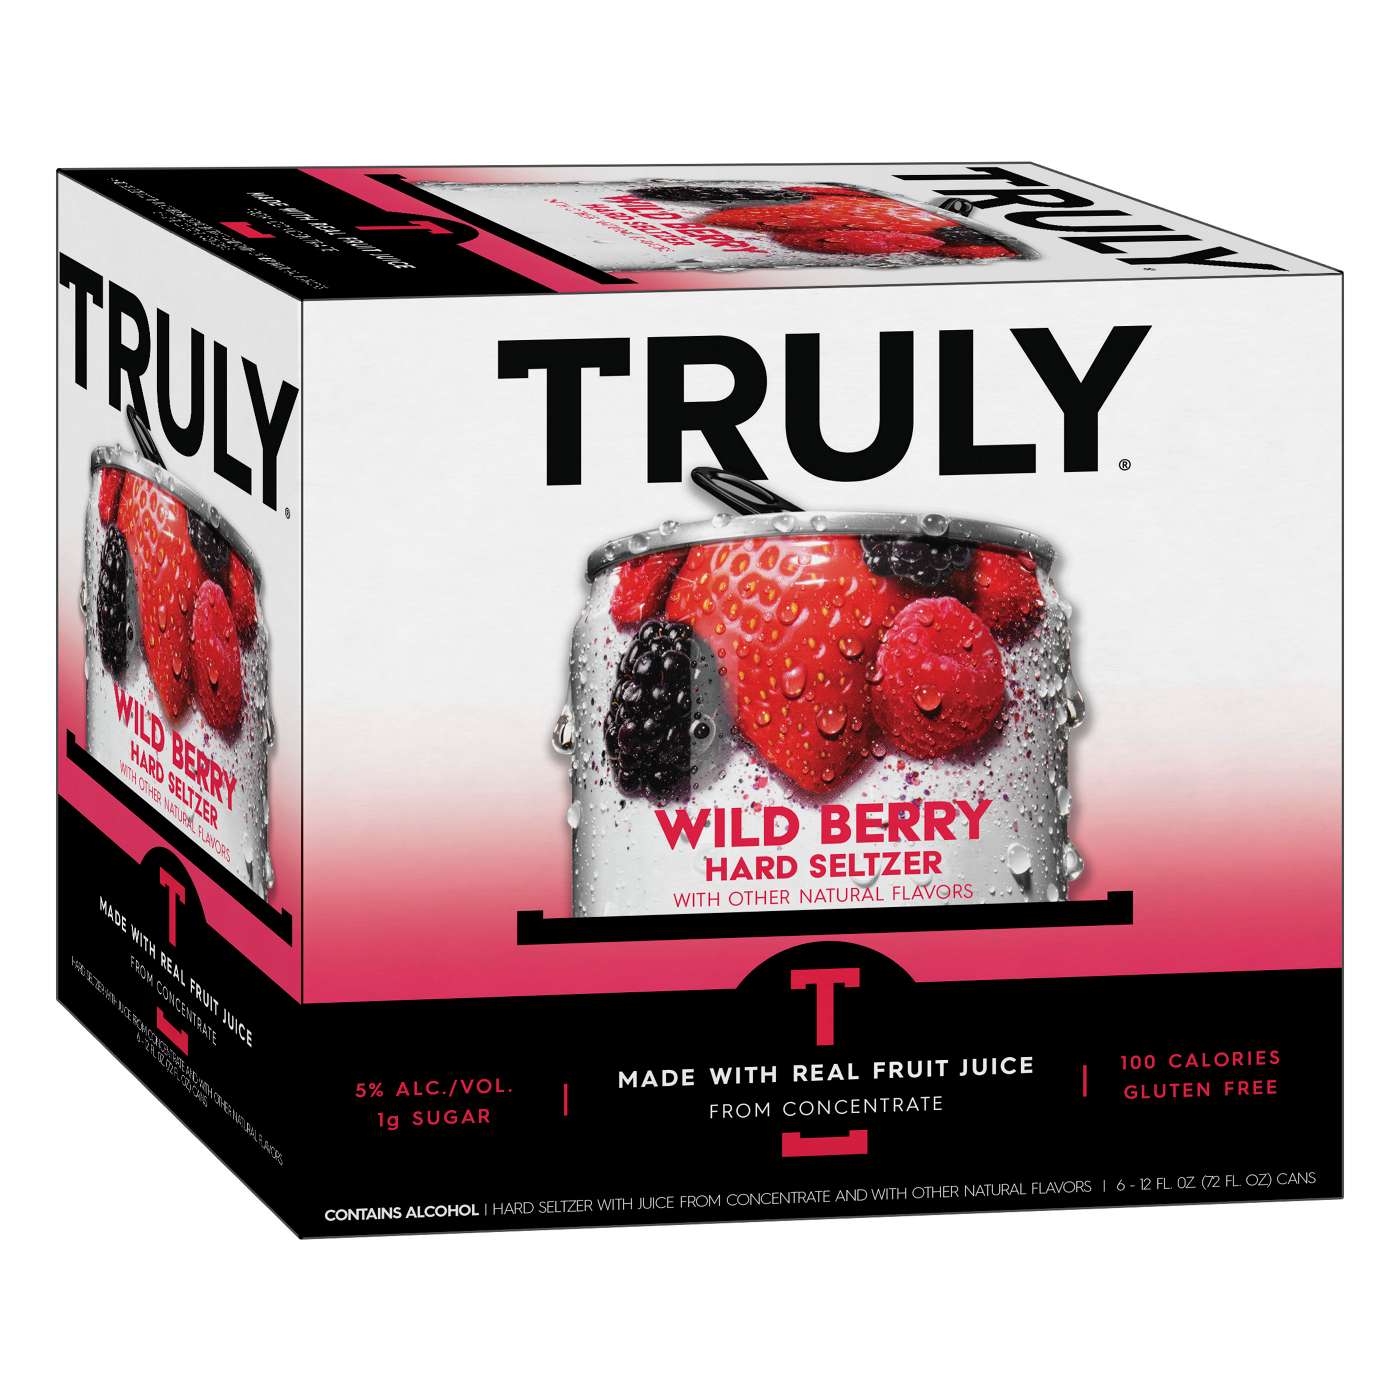 Truly Wild Berry Hard Seltzer 6 pk Cans; image 4 of 4